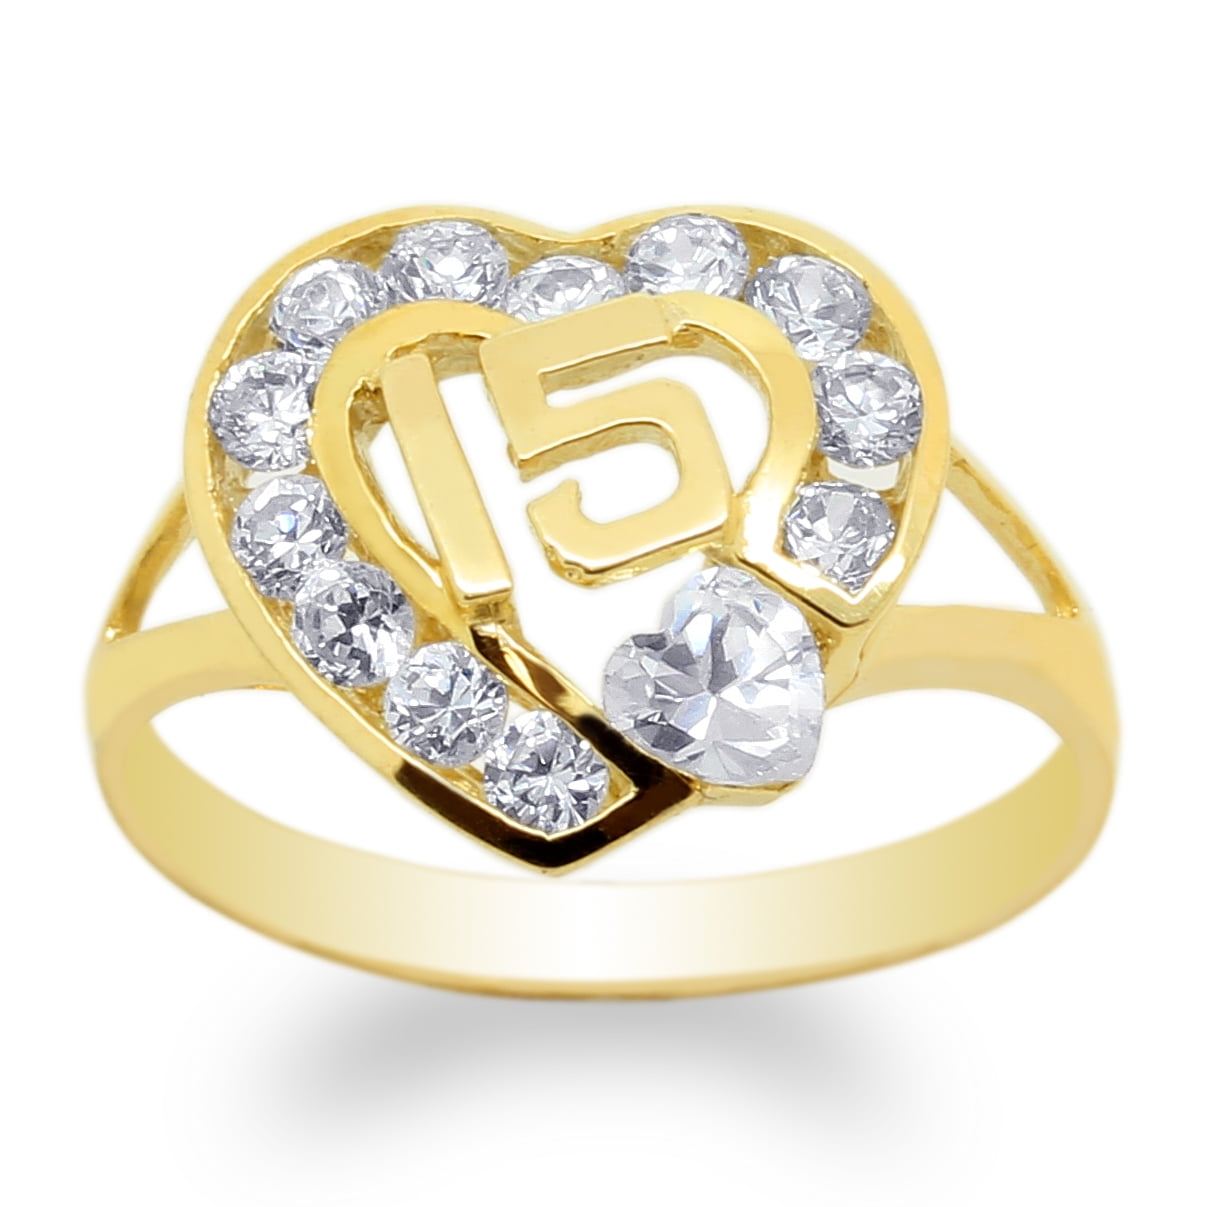 JamesJenny 10K Yellow Gold Heart Shaped 15 Anos Quinceanera Ring Size 4-10